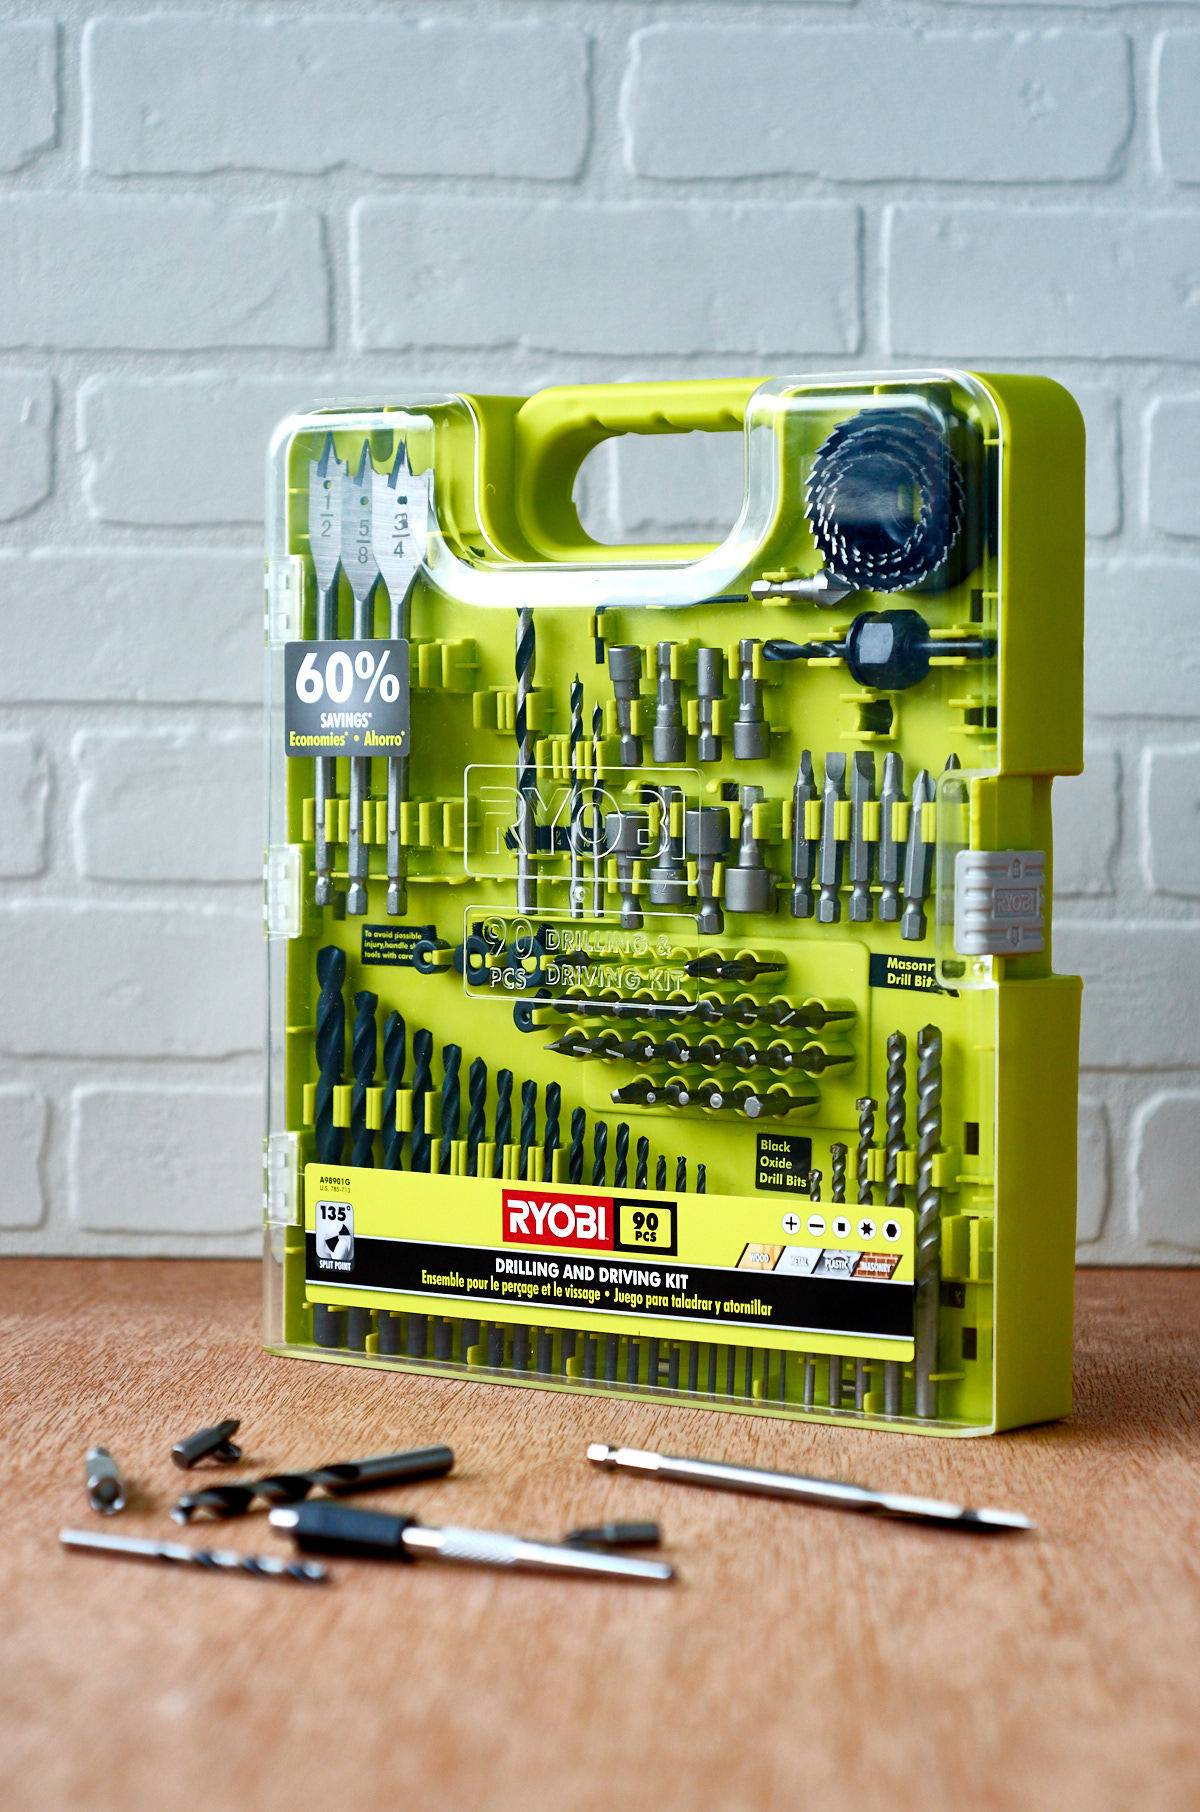 A drillbit set with some of the drill bits laying out of package in front of it.